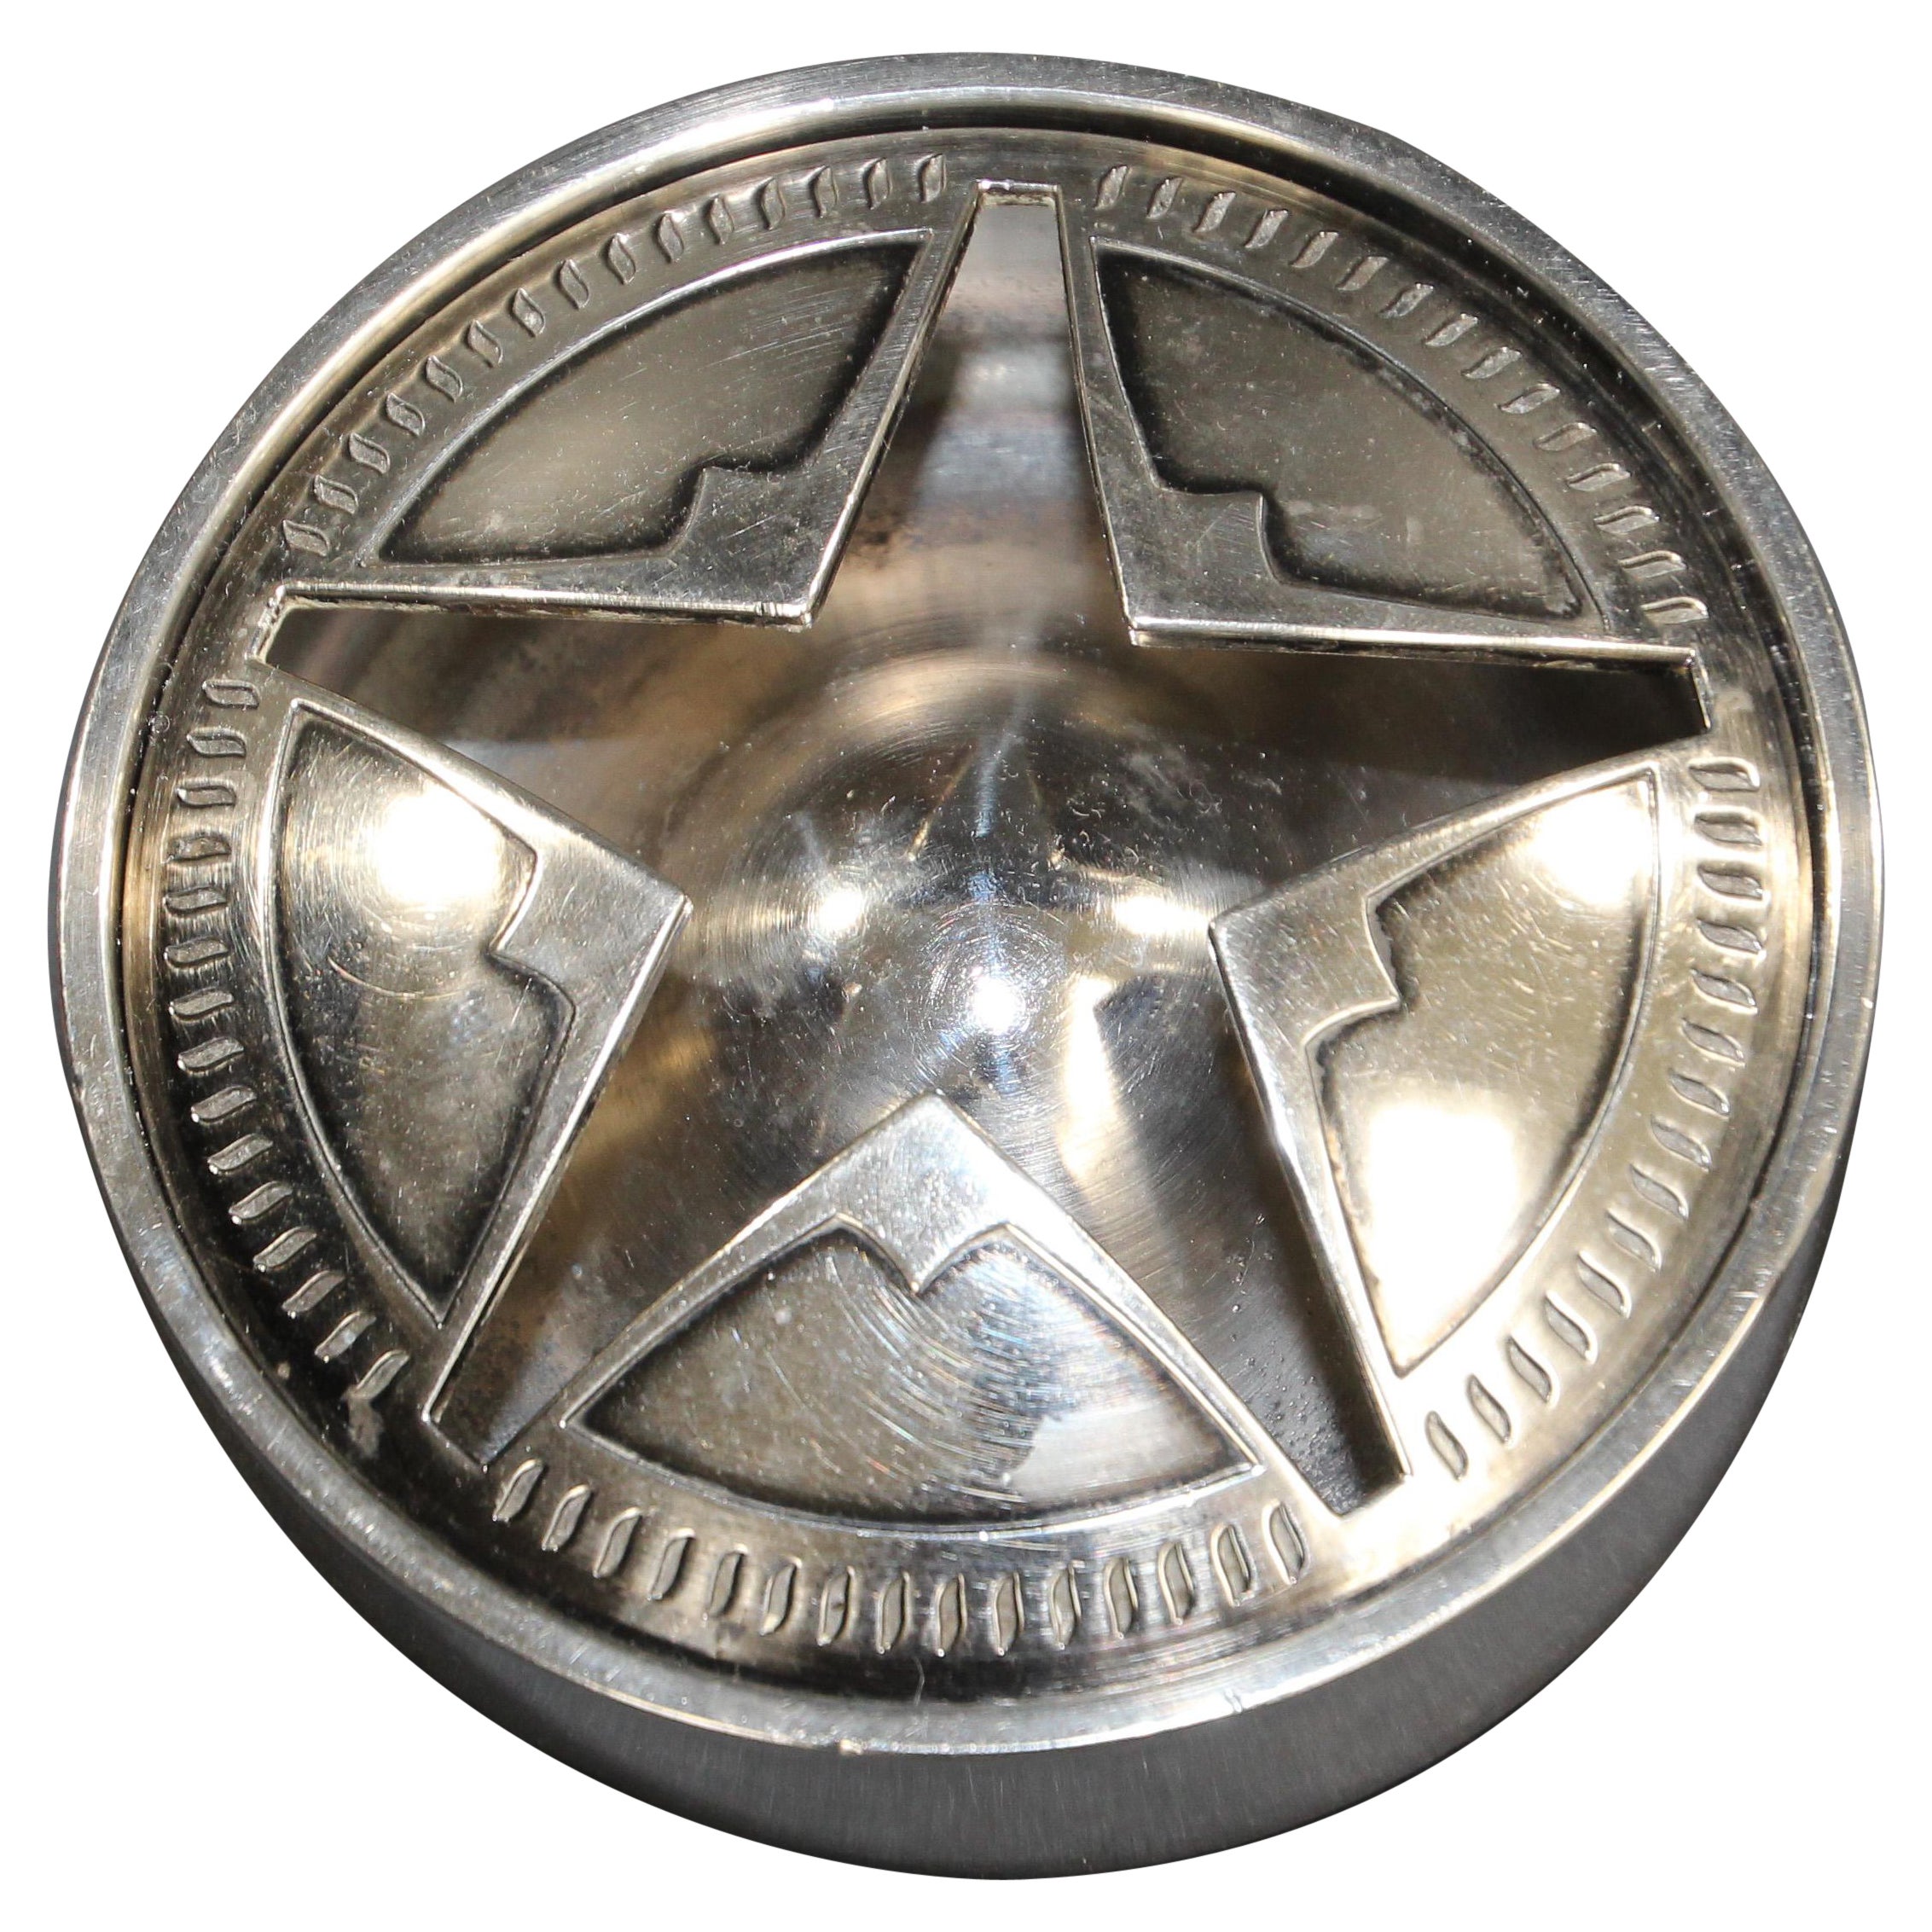 Vintage Marlboro Texas Lone Star Stainless Steel Ashtray with Lid